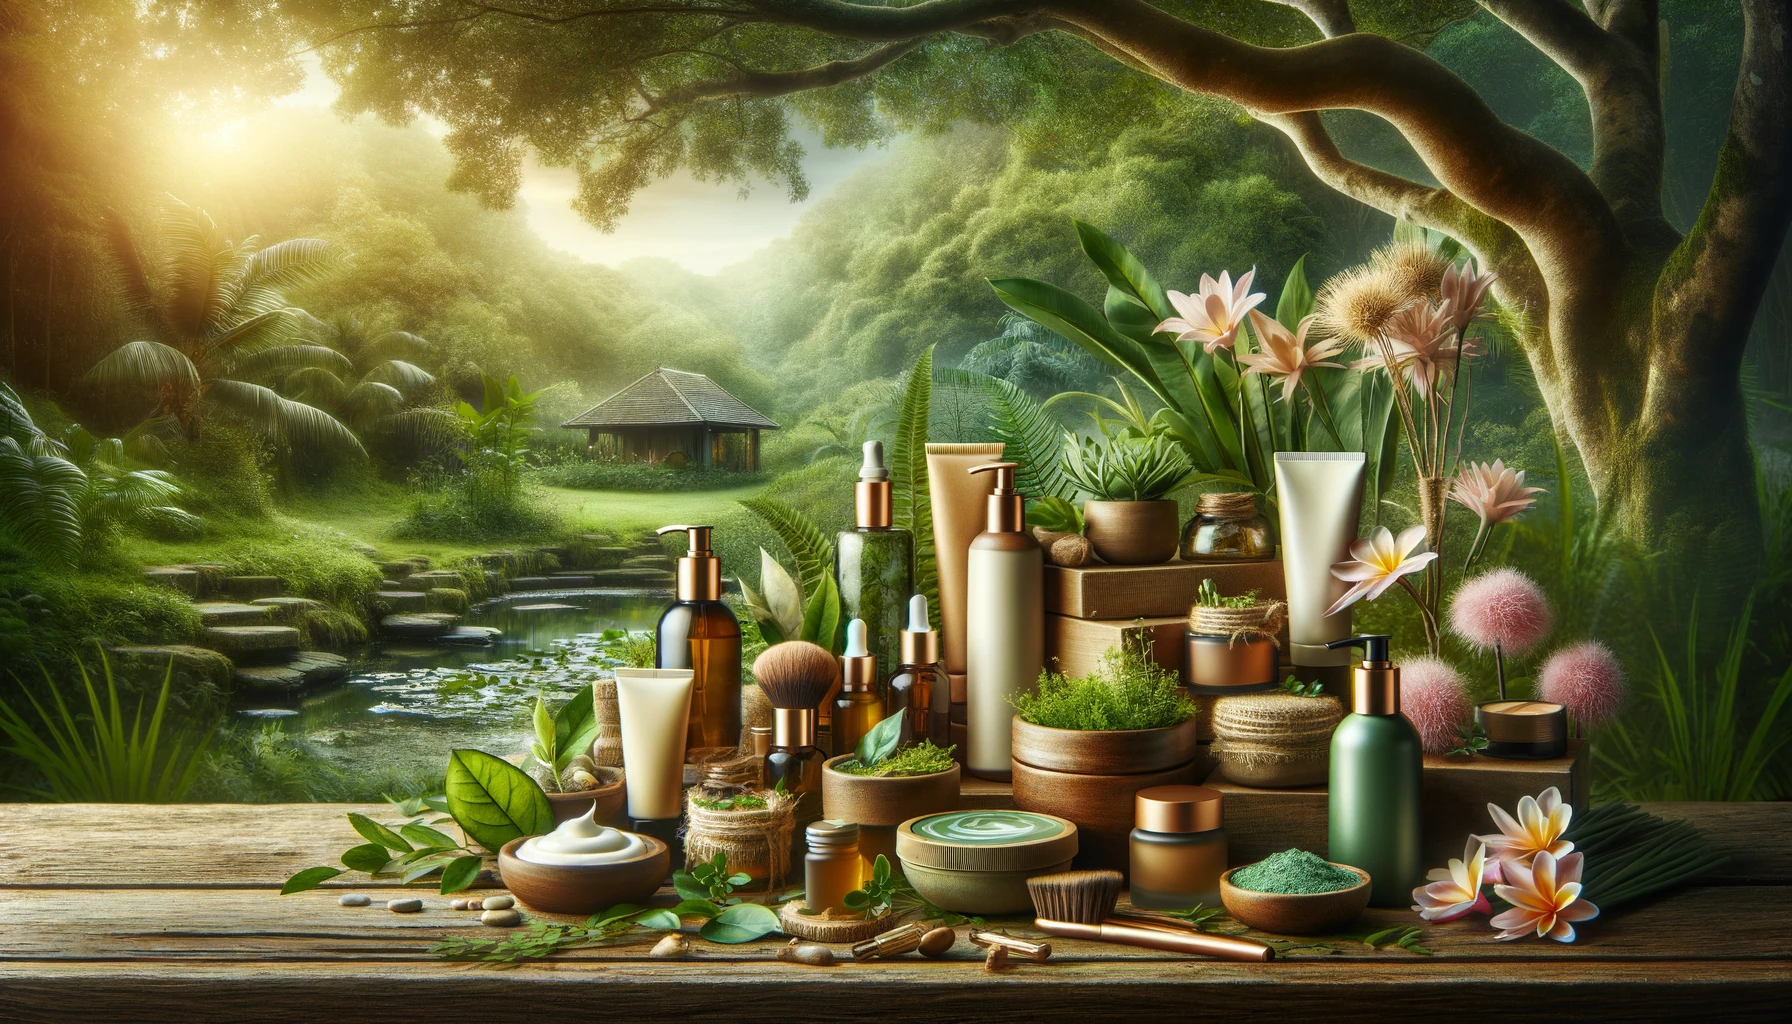  Eco-friendly natural beauty products in a lush outdoor setting, highlighting Healthy Life - New Start's focus on natural beauty.